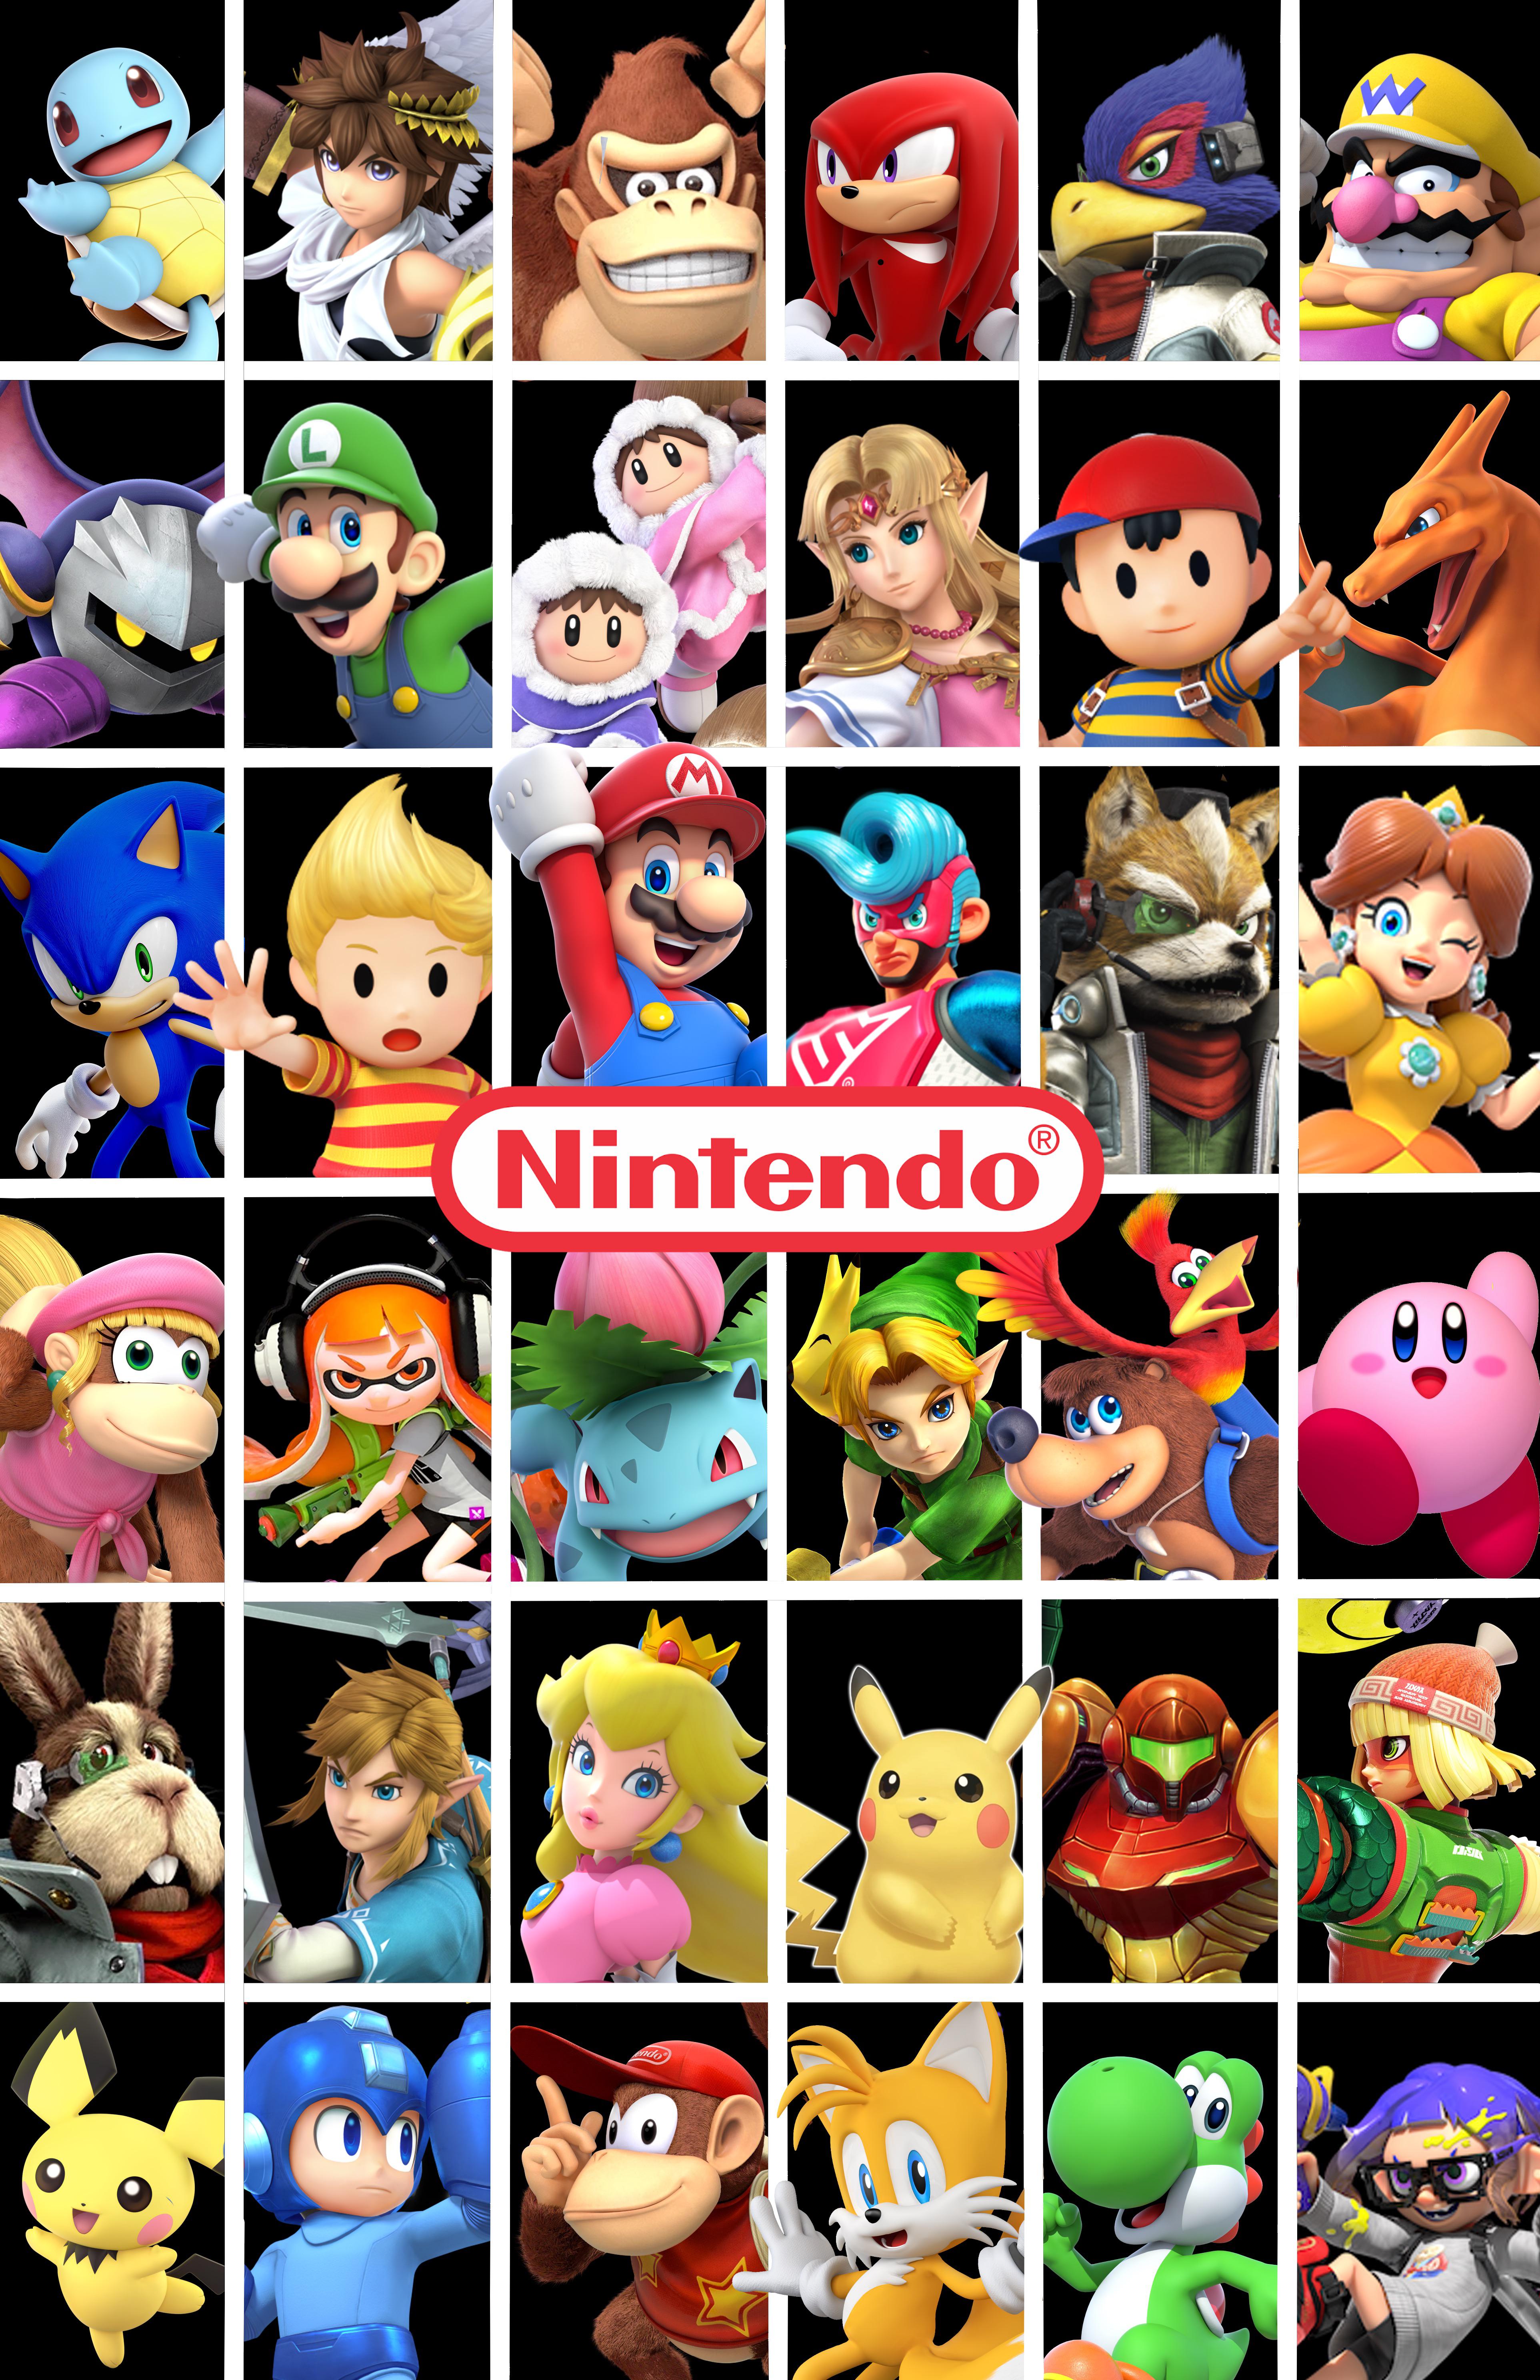 Made a little wallpaper with Nintendo